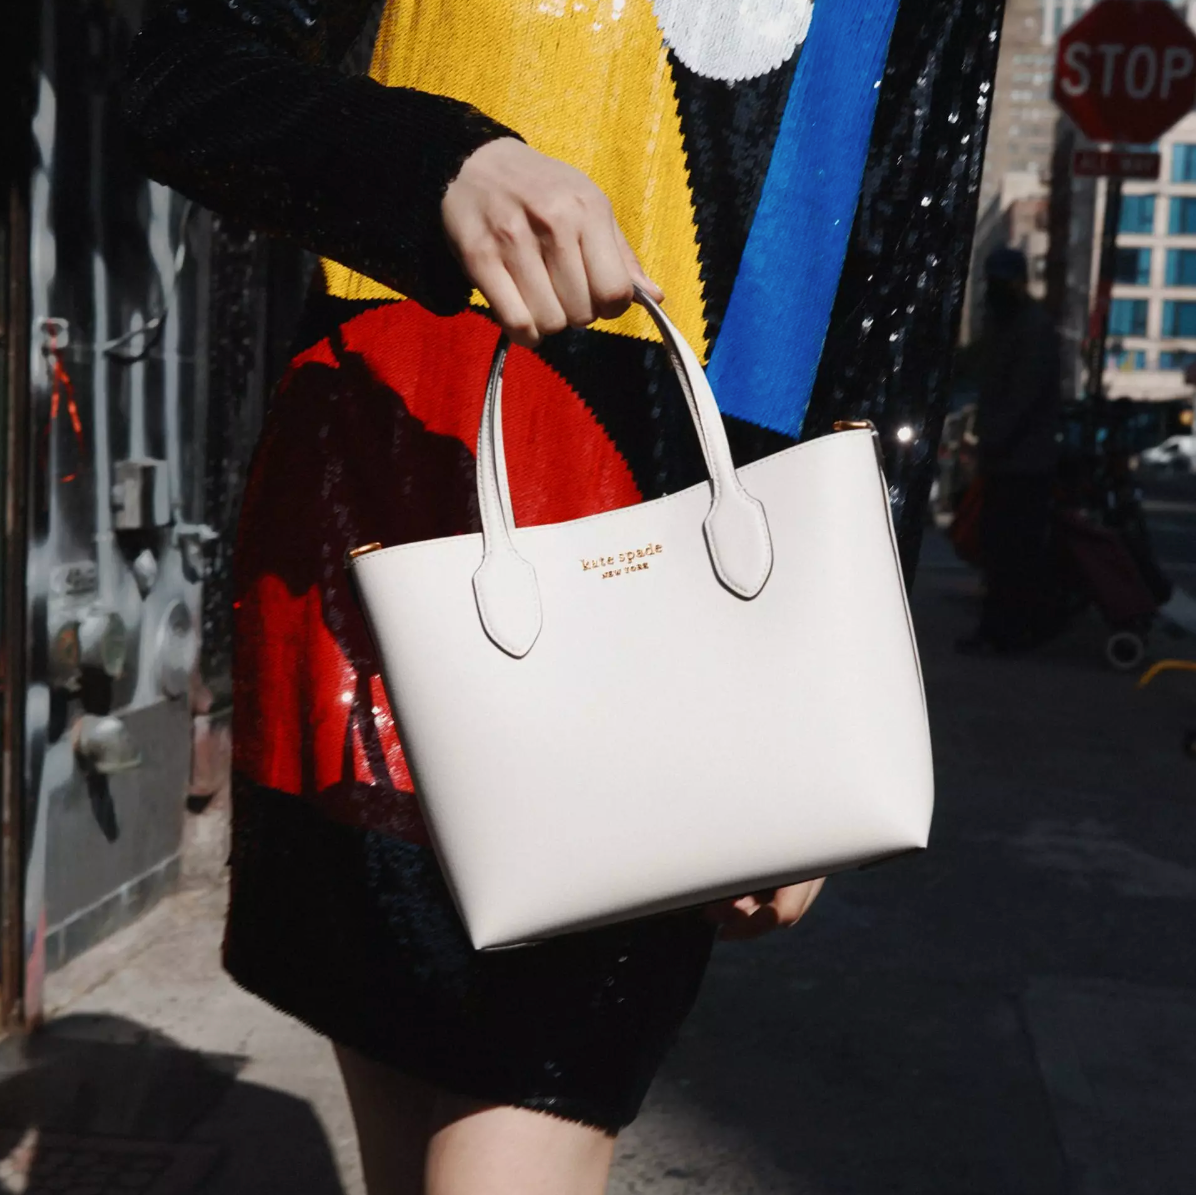 Kate Spade Labor Day Sale 2023: Save Up to 60% on Handbags, Shoes